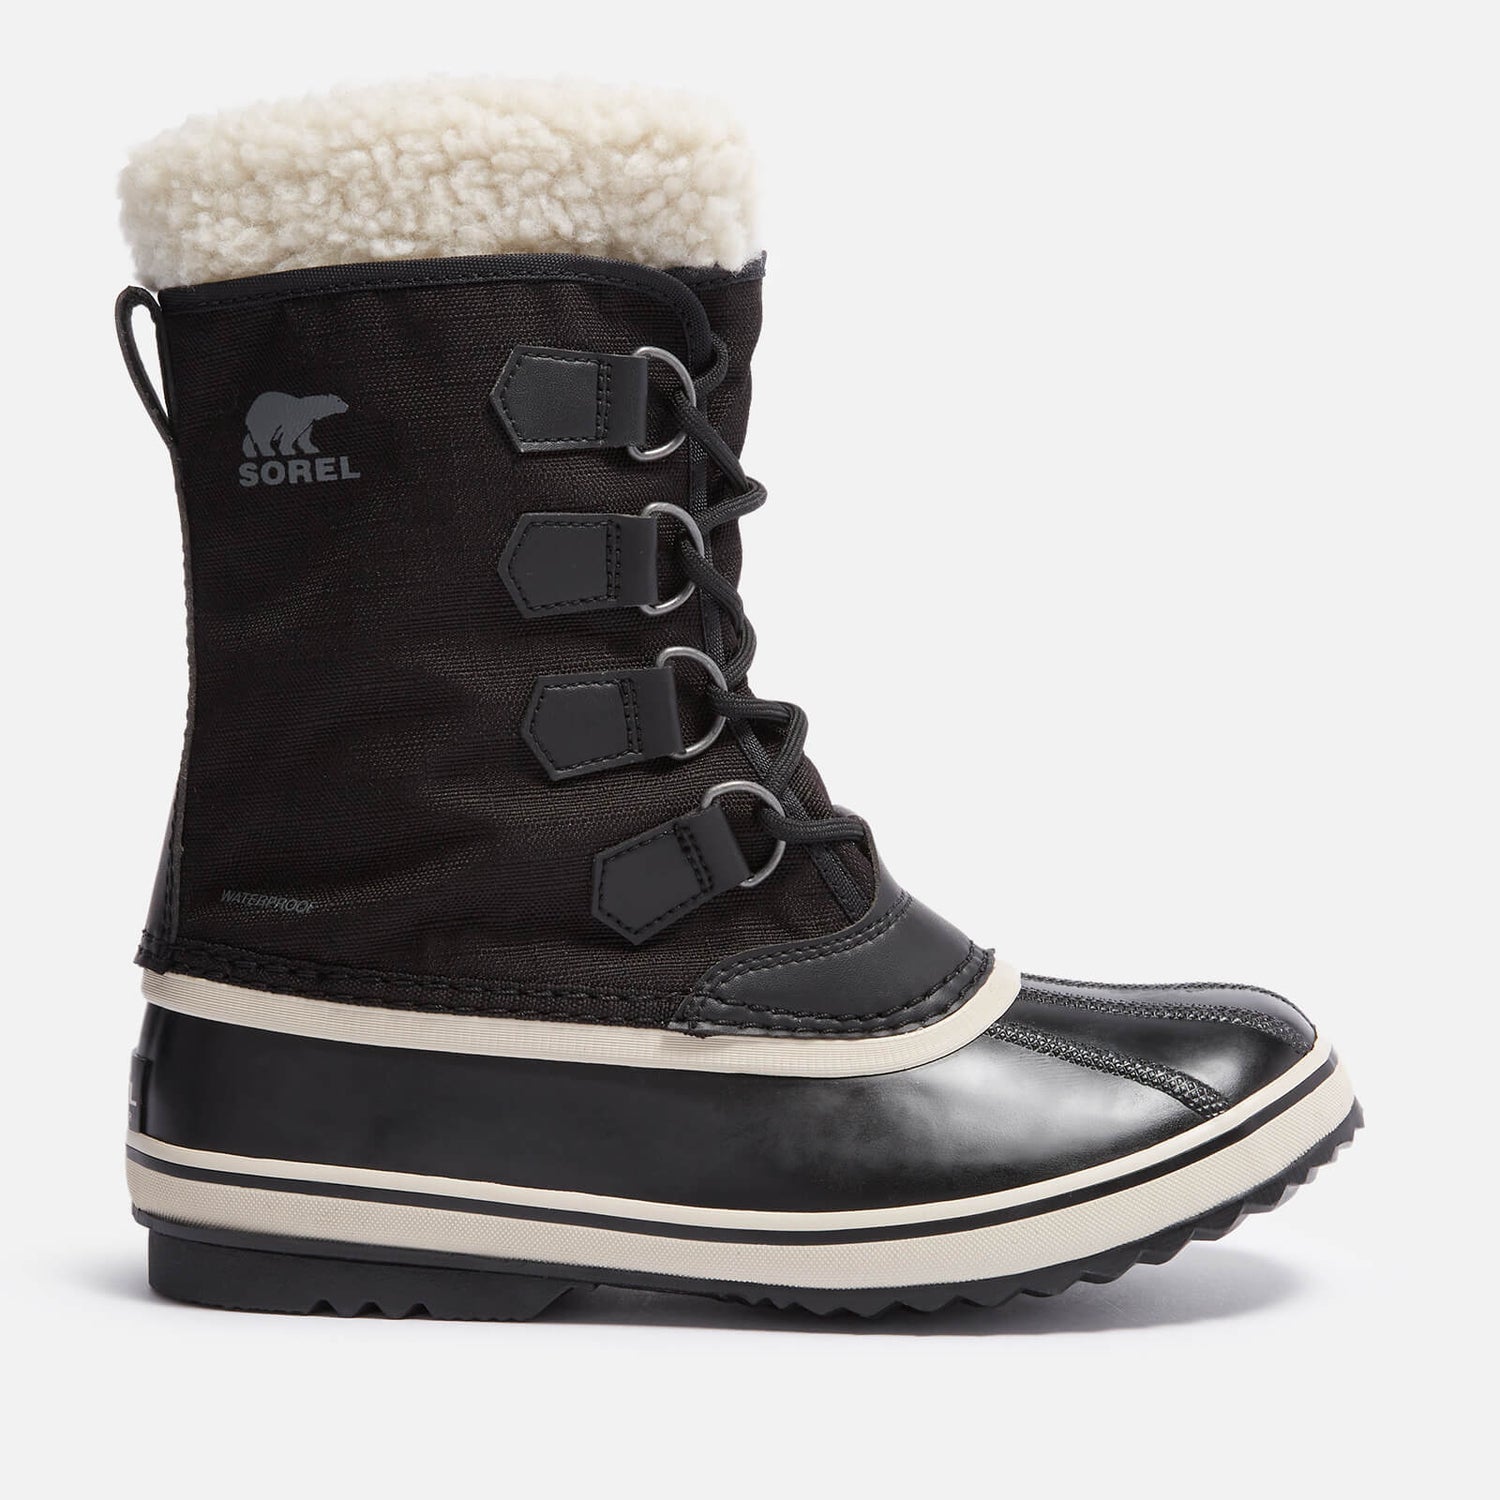 Sorel Winter Carnival Waterproof Leather and Canvas Boots - UK 3